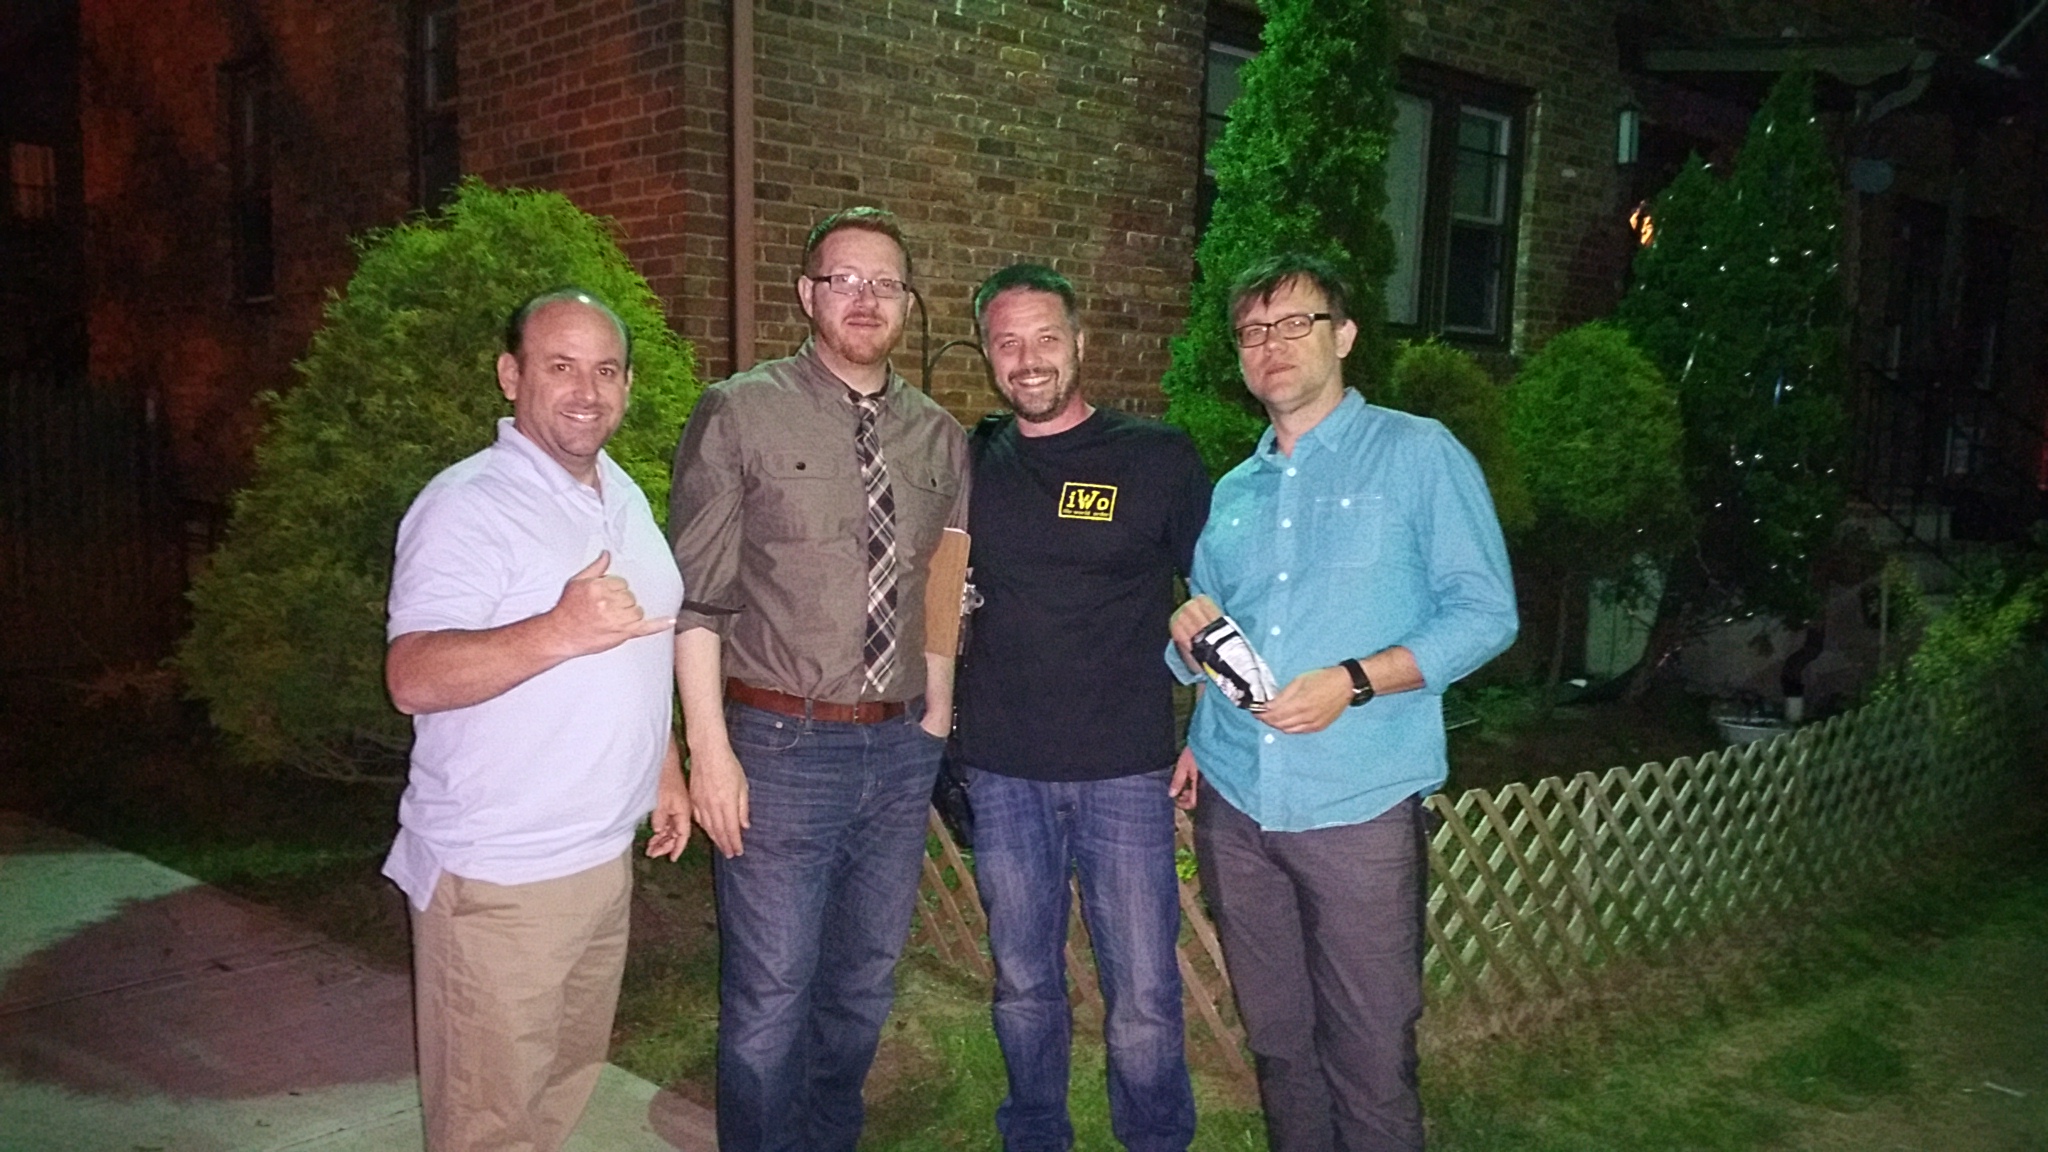 Scott M. Schewe with the Director, Set Director & Cameraman for MomSters2 shot on location in New Jersey